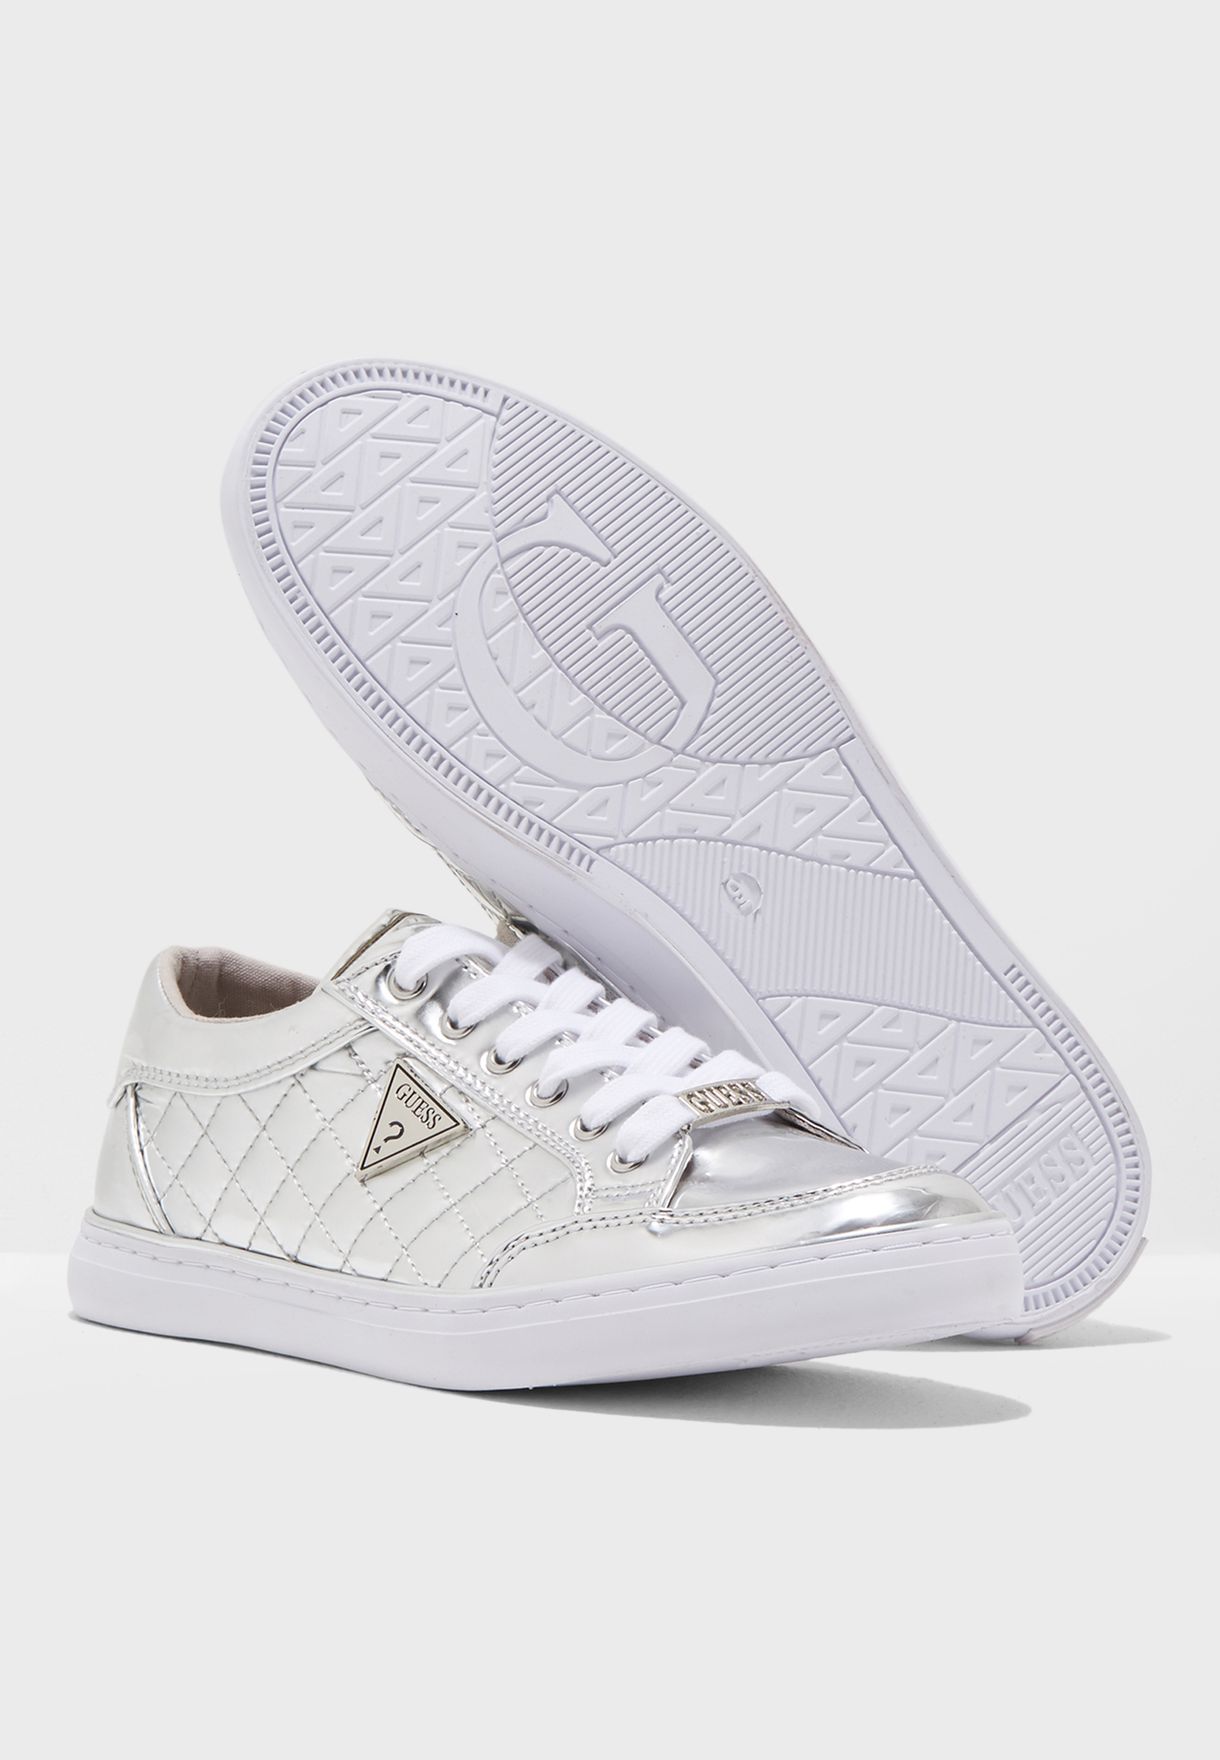 guess quilted slip on sneakers